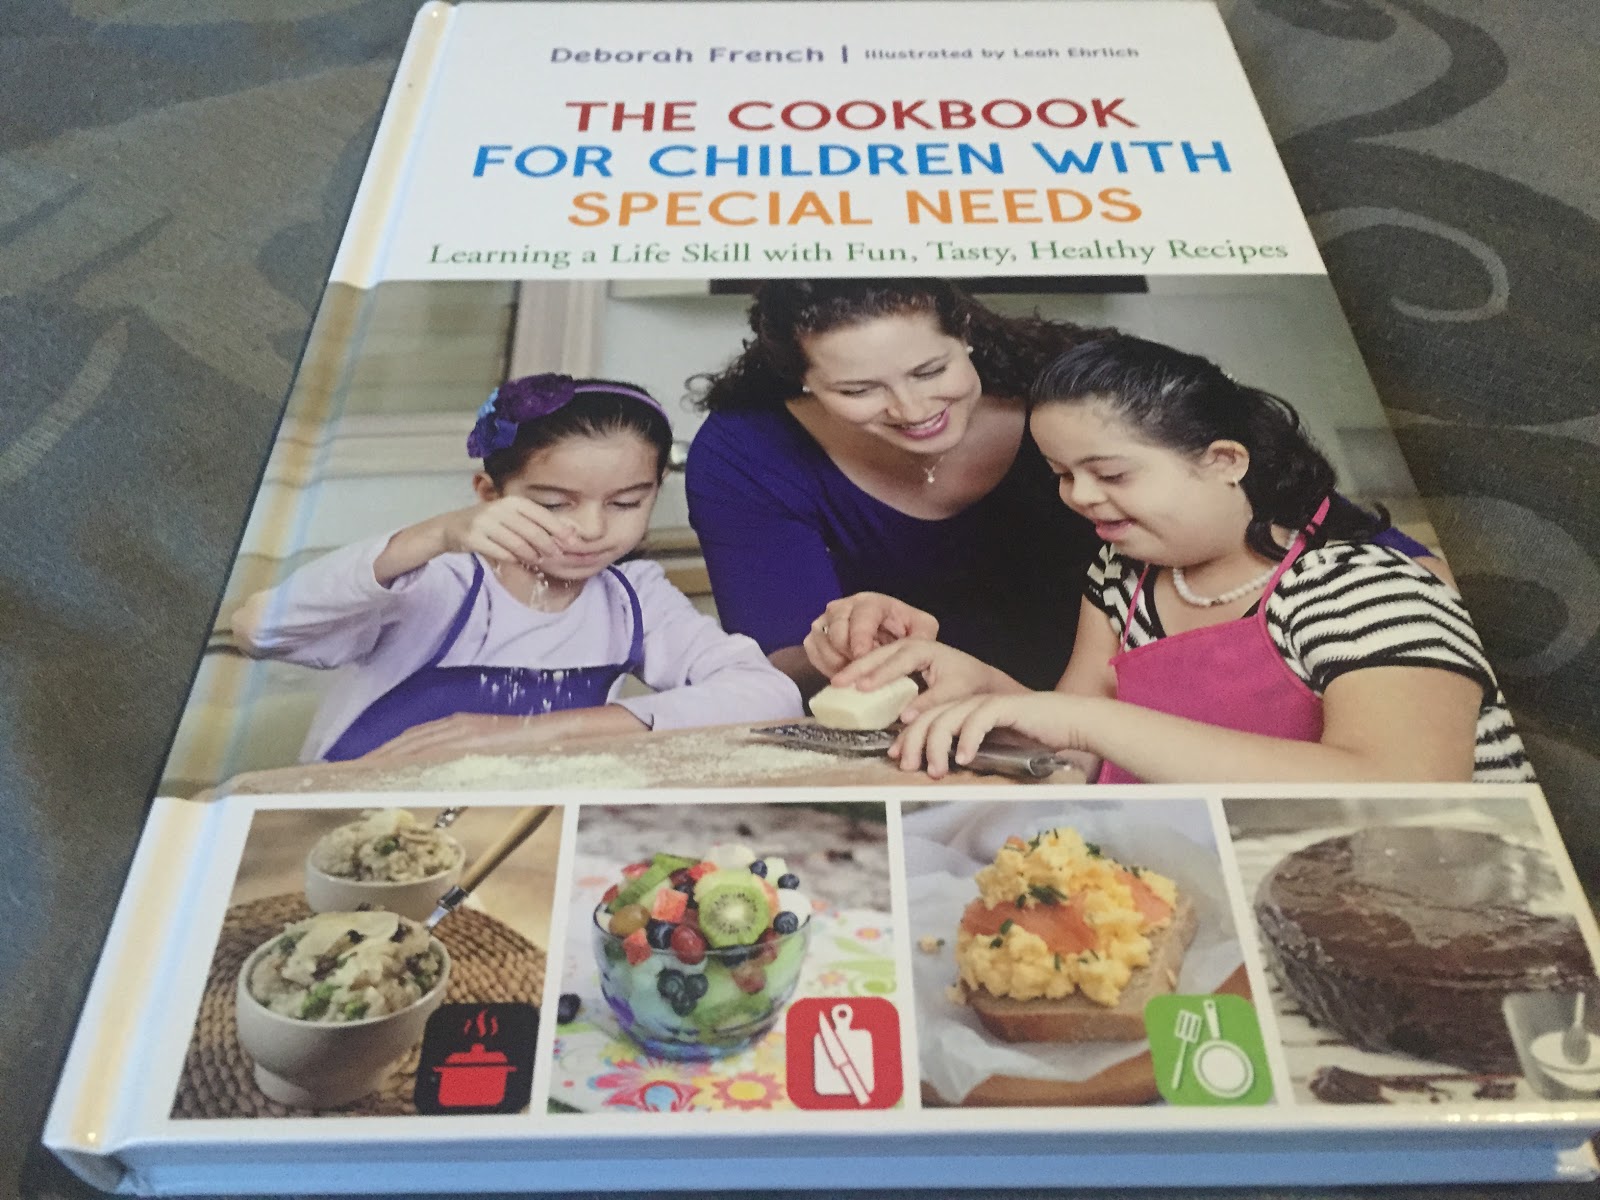 The Cookbook for children with special needs